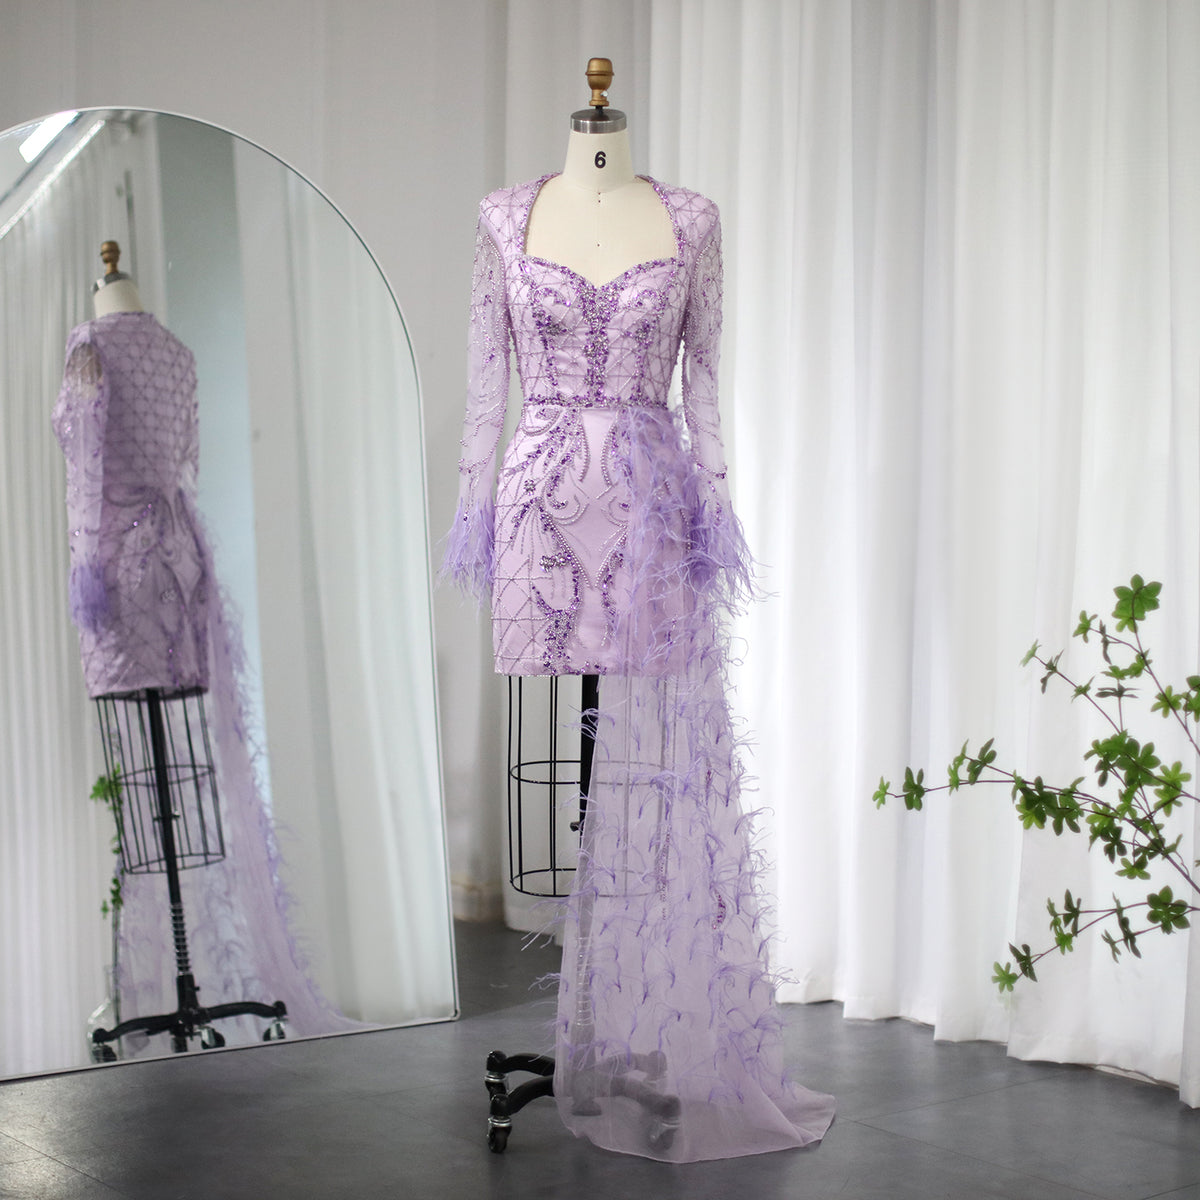 Sharon Said Luxury Dubai Lilac Short Evening Dresses with Feathers OverSkirt Arabic Coral Mini Cocktail Party Prom Dress SS355